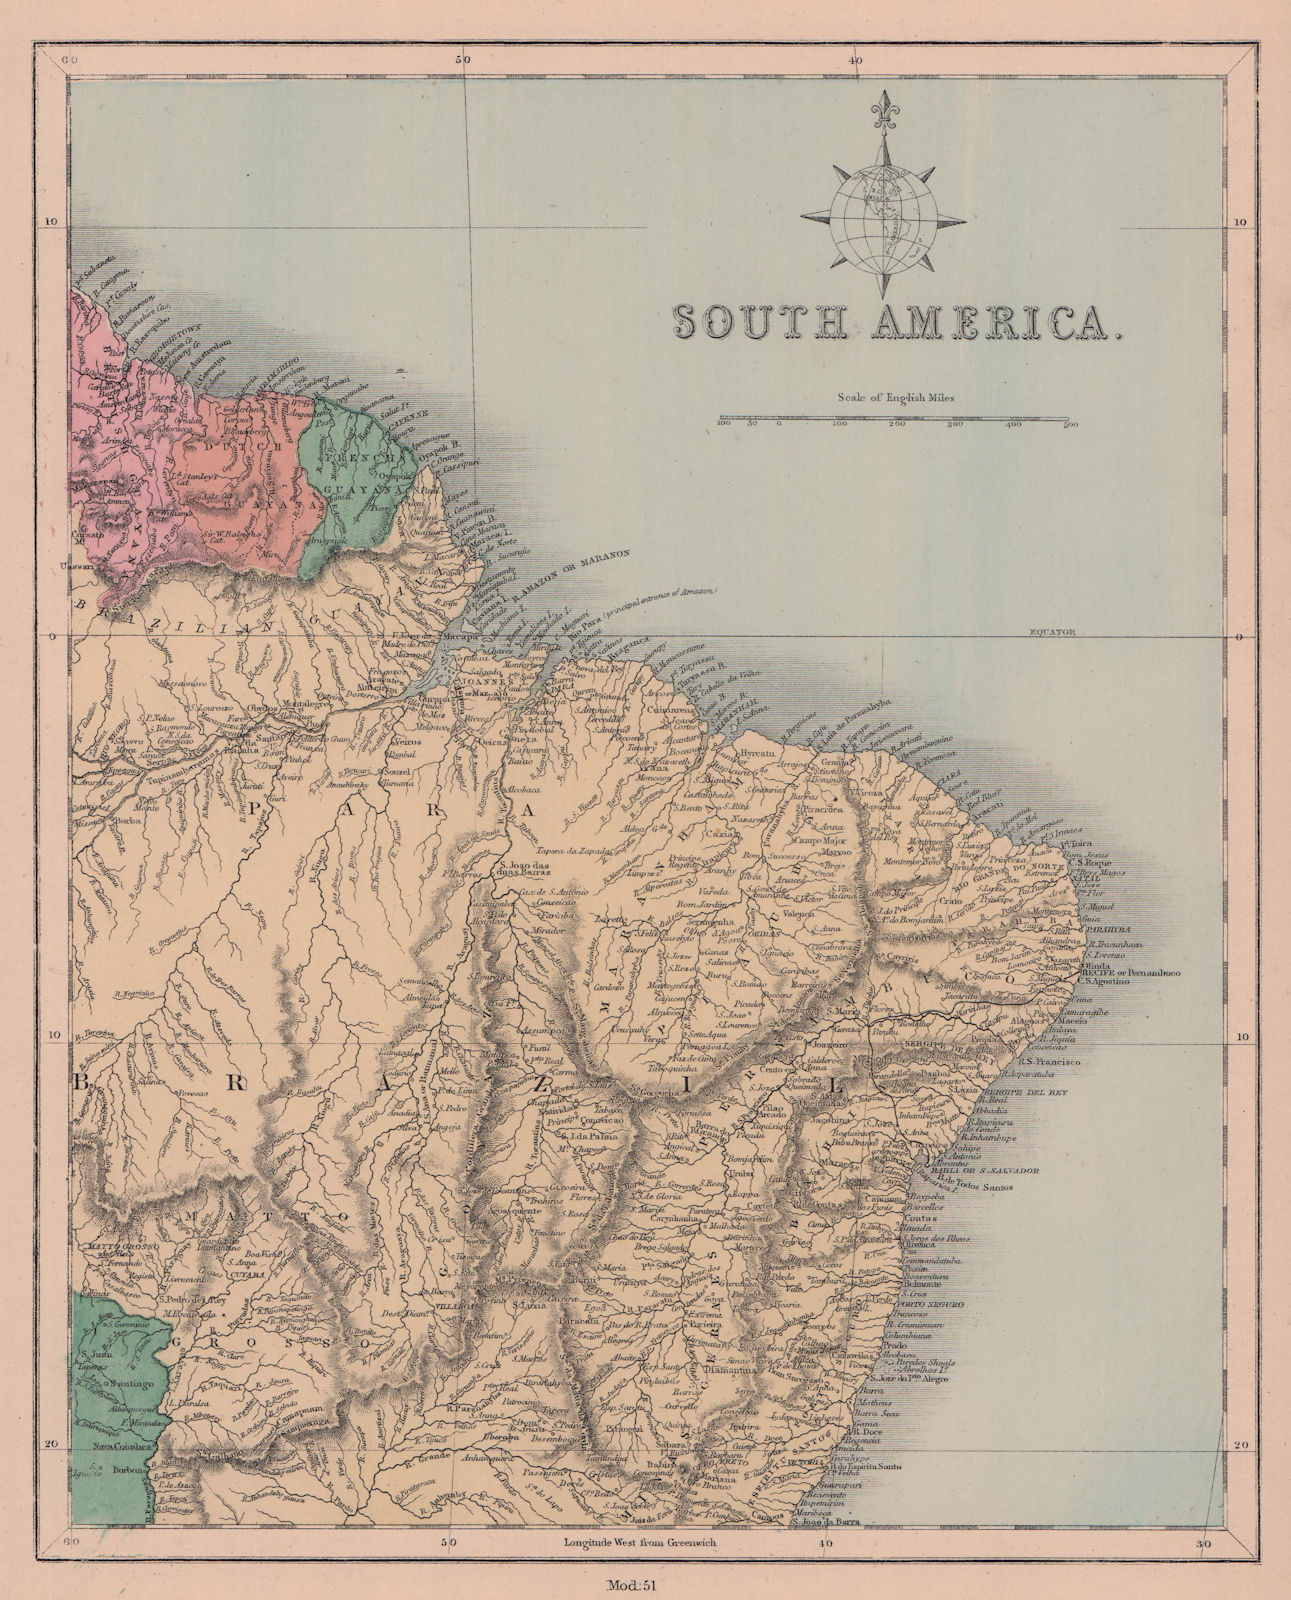 South America north east. Brazil & Guianas. HUGHES 1876 old antique map chart